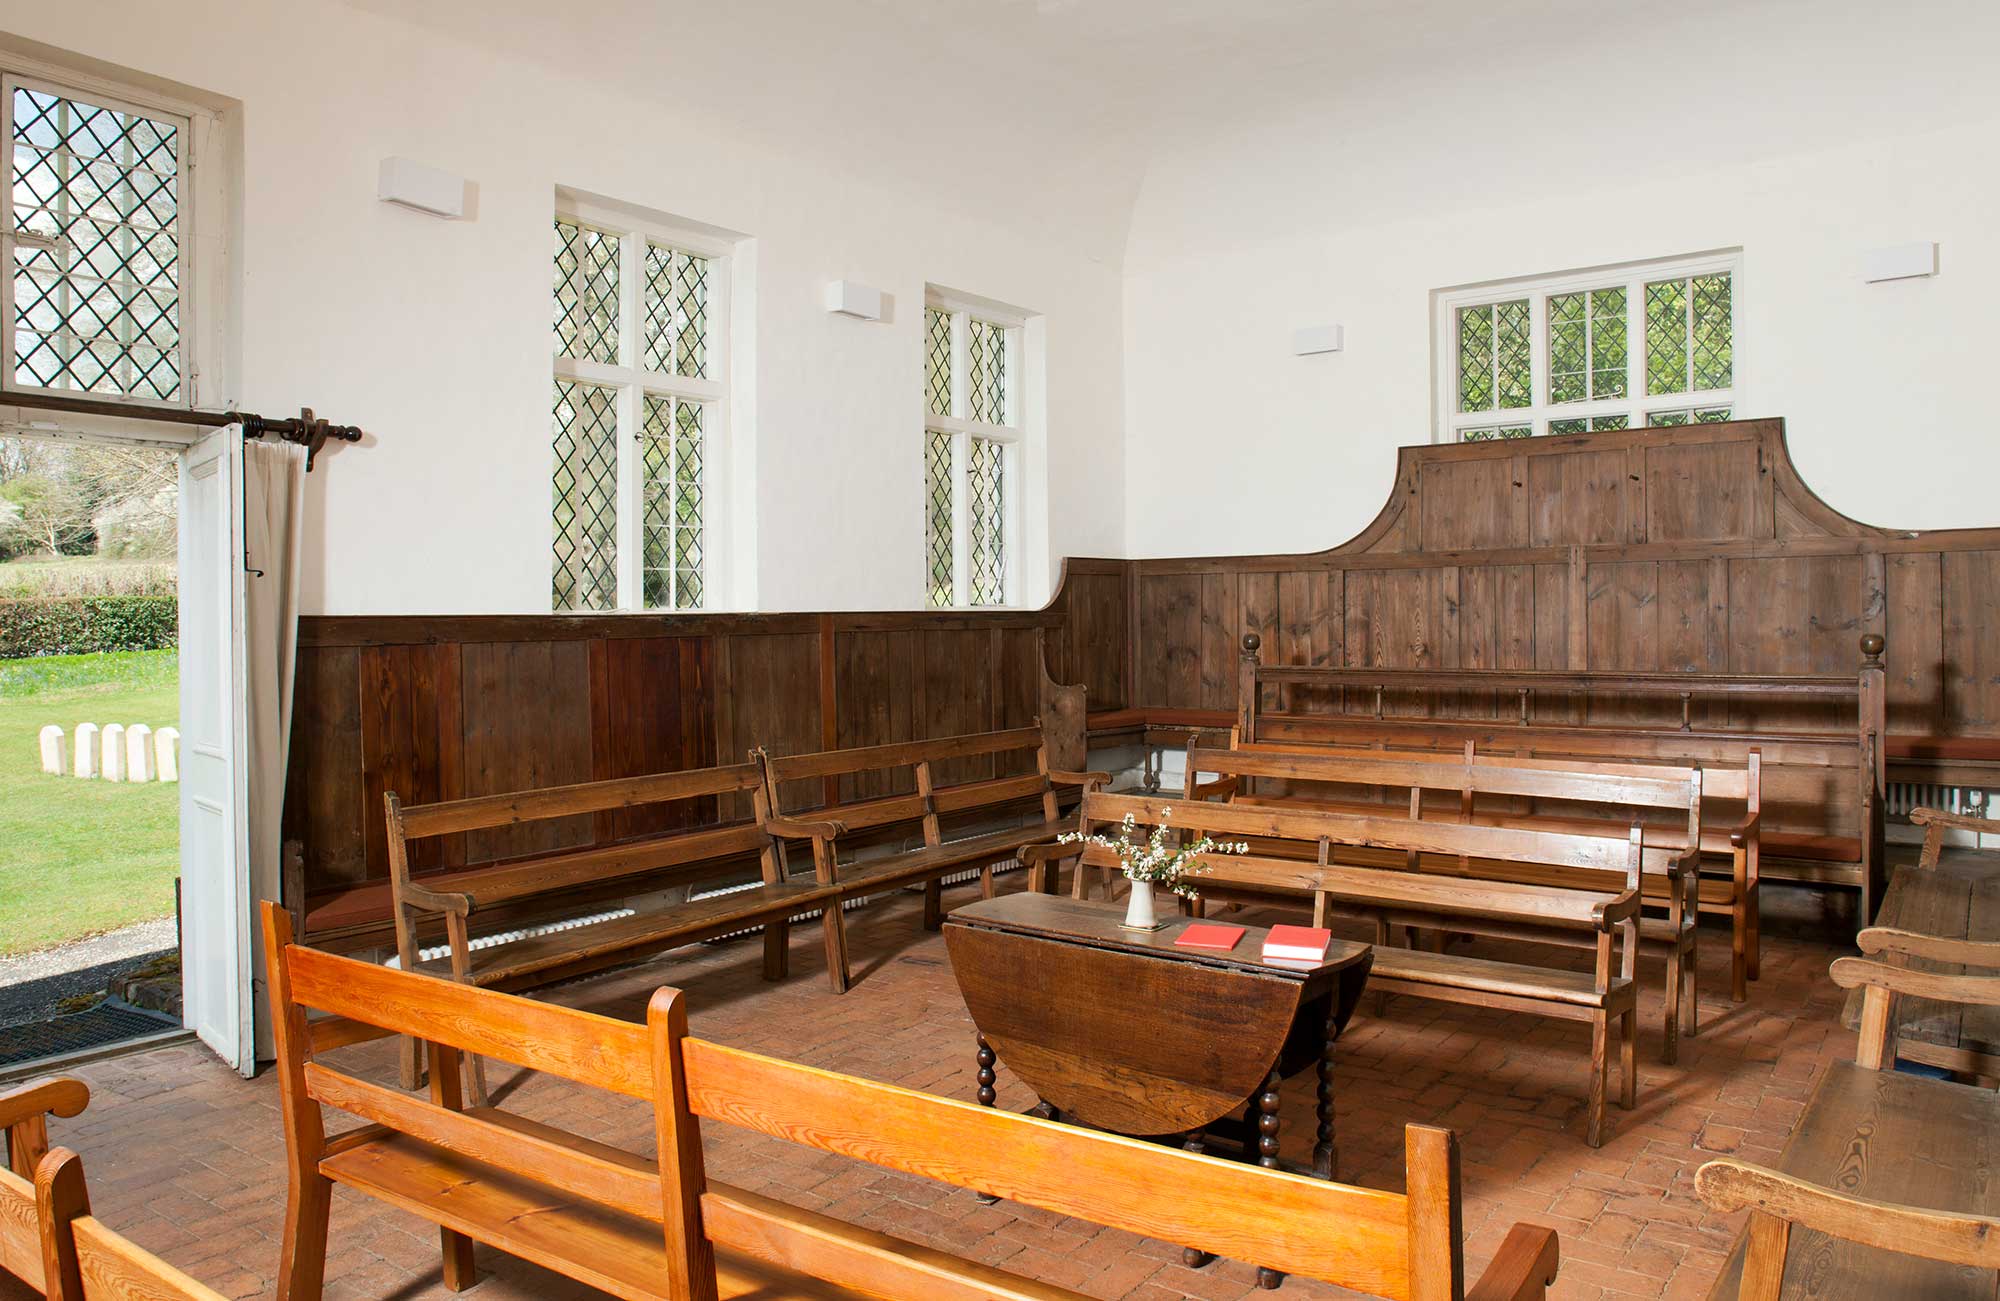 Interior of meeting house with wooden benches arranged around a table